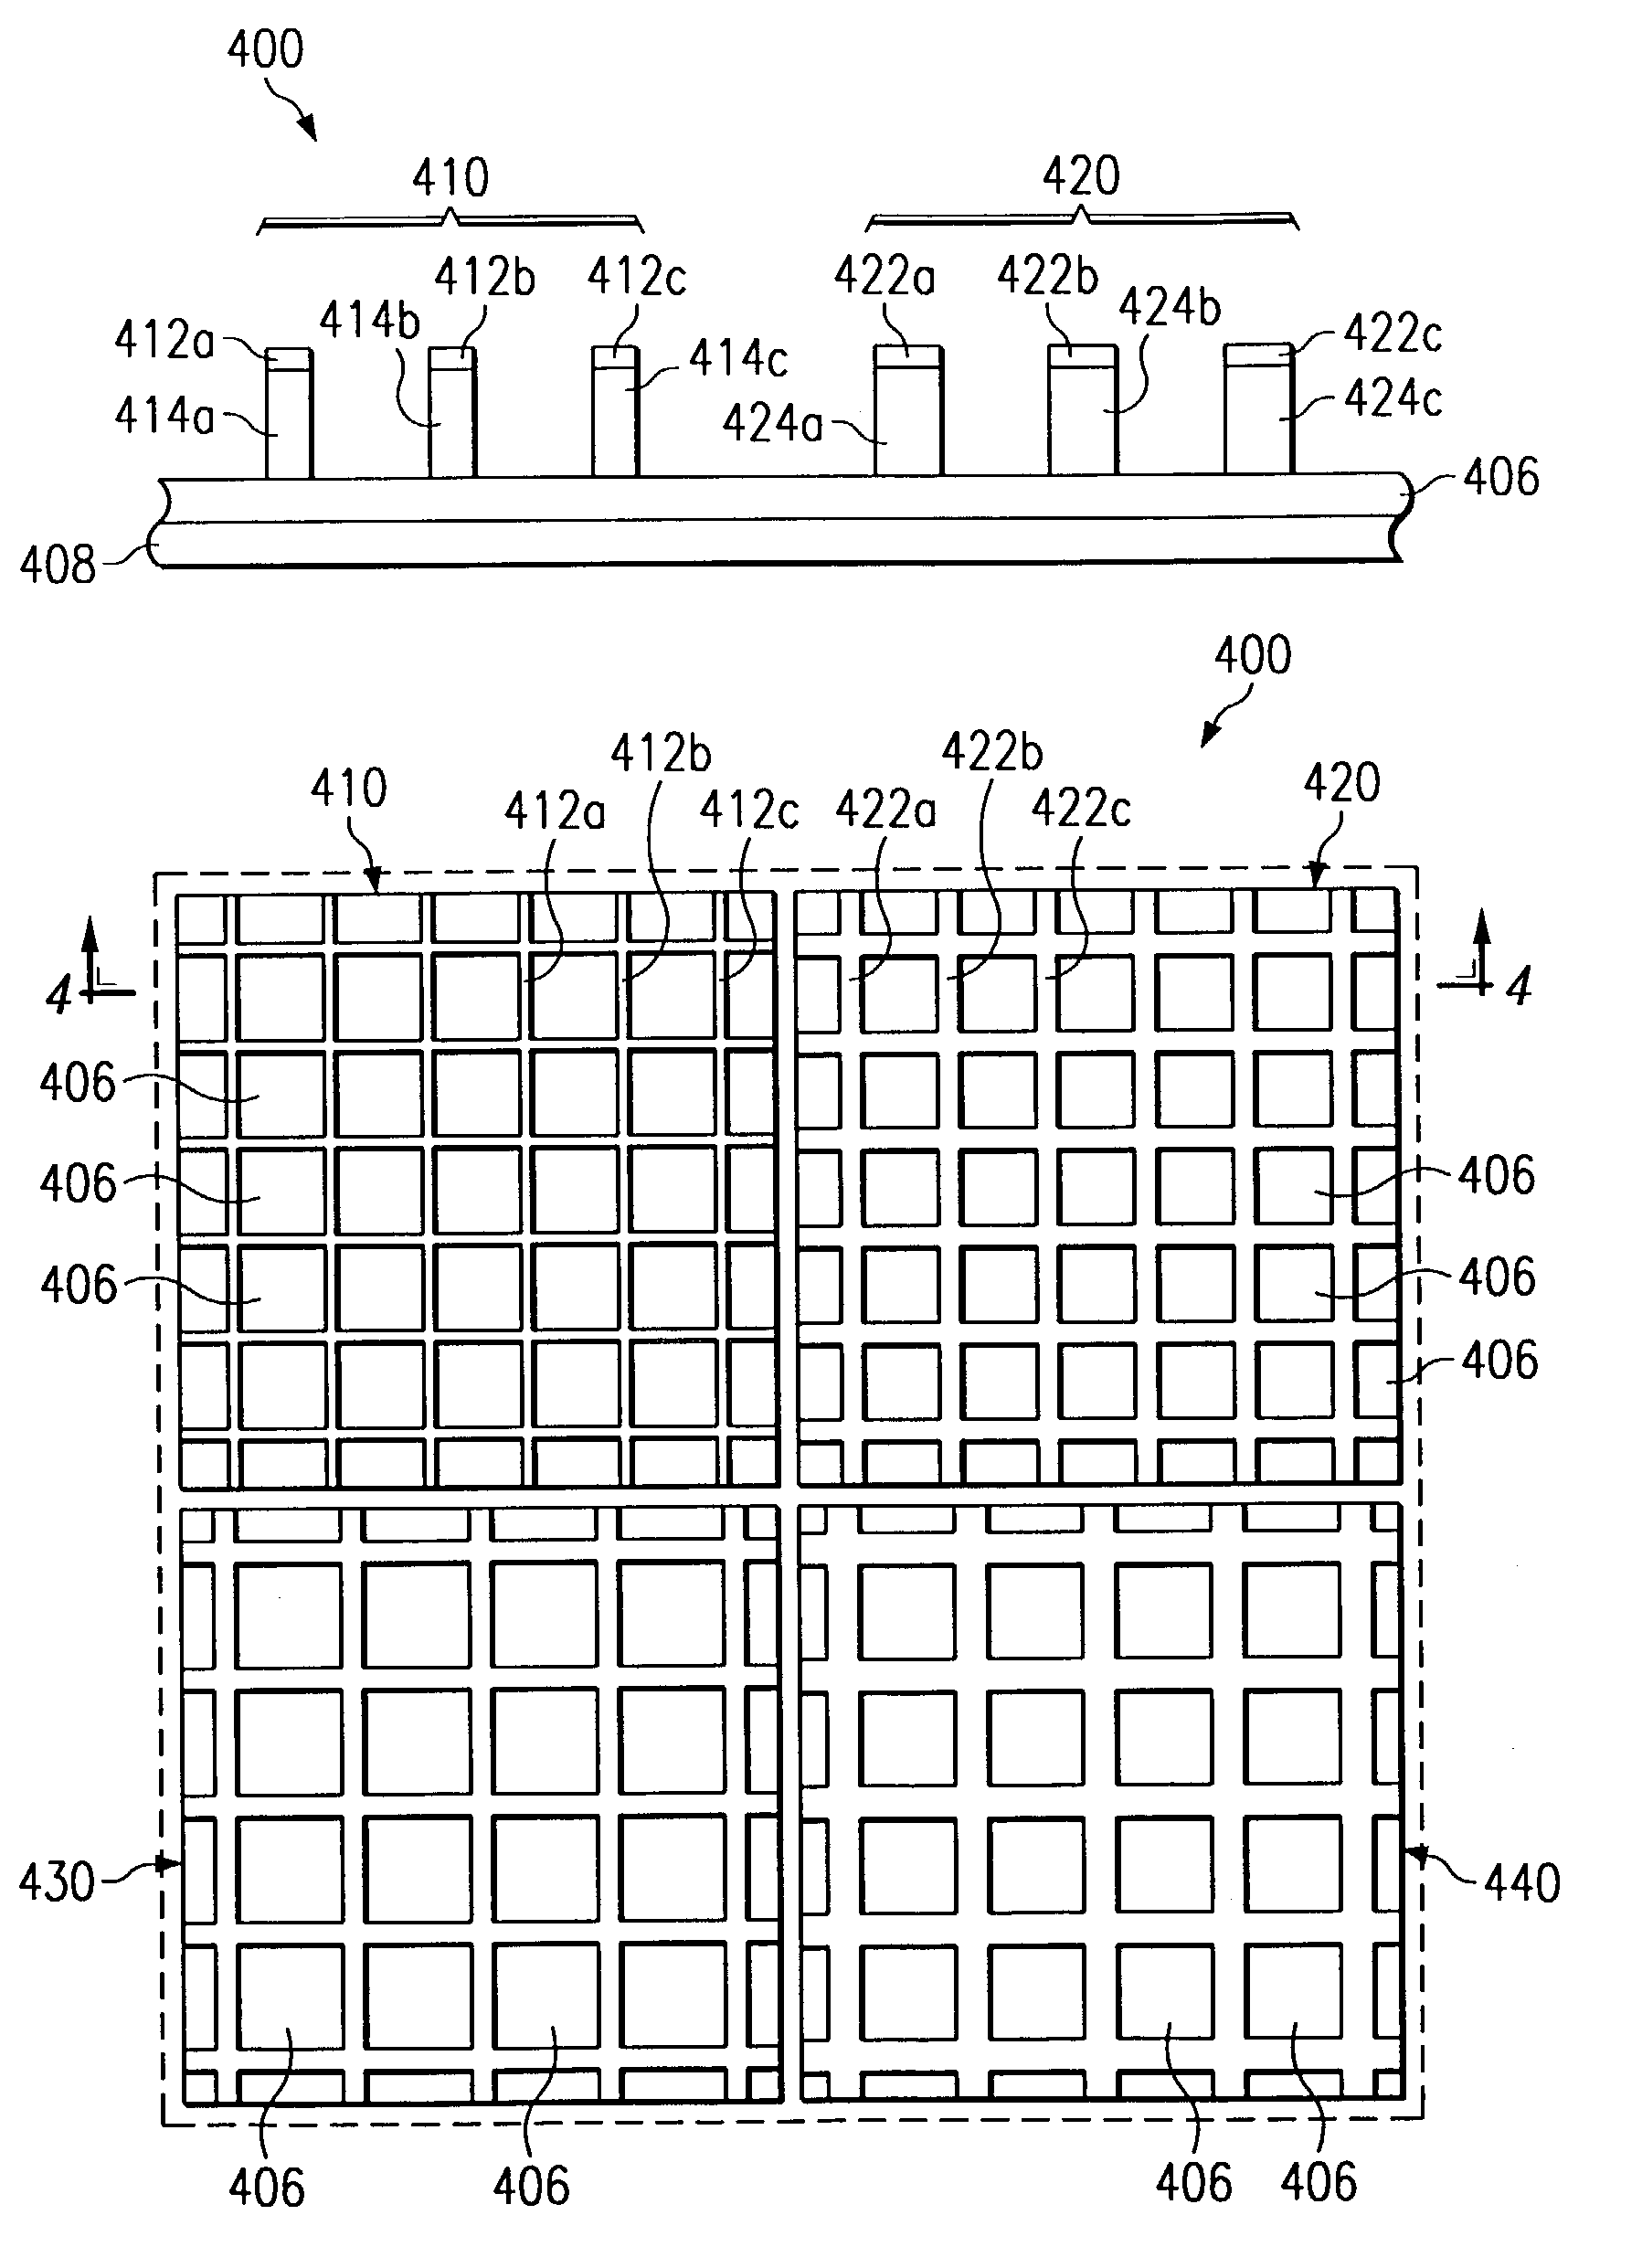 Multi-spectral infrared super-pixel photodetector and imager